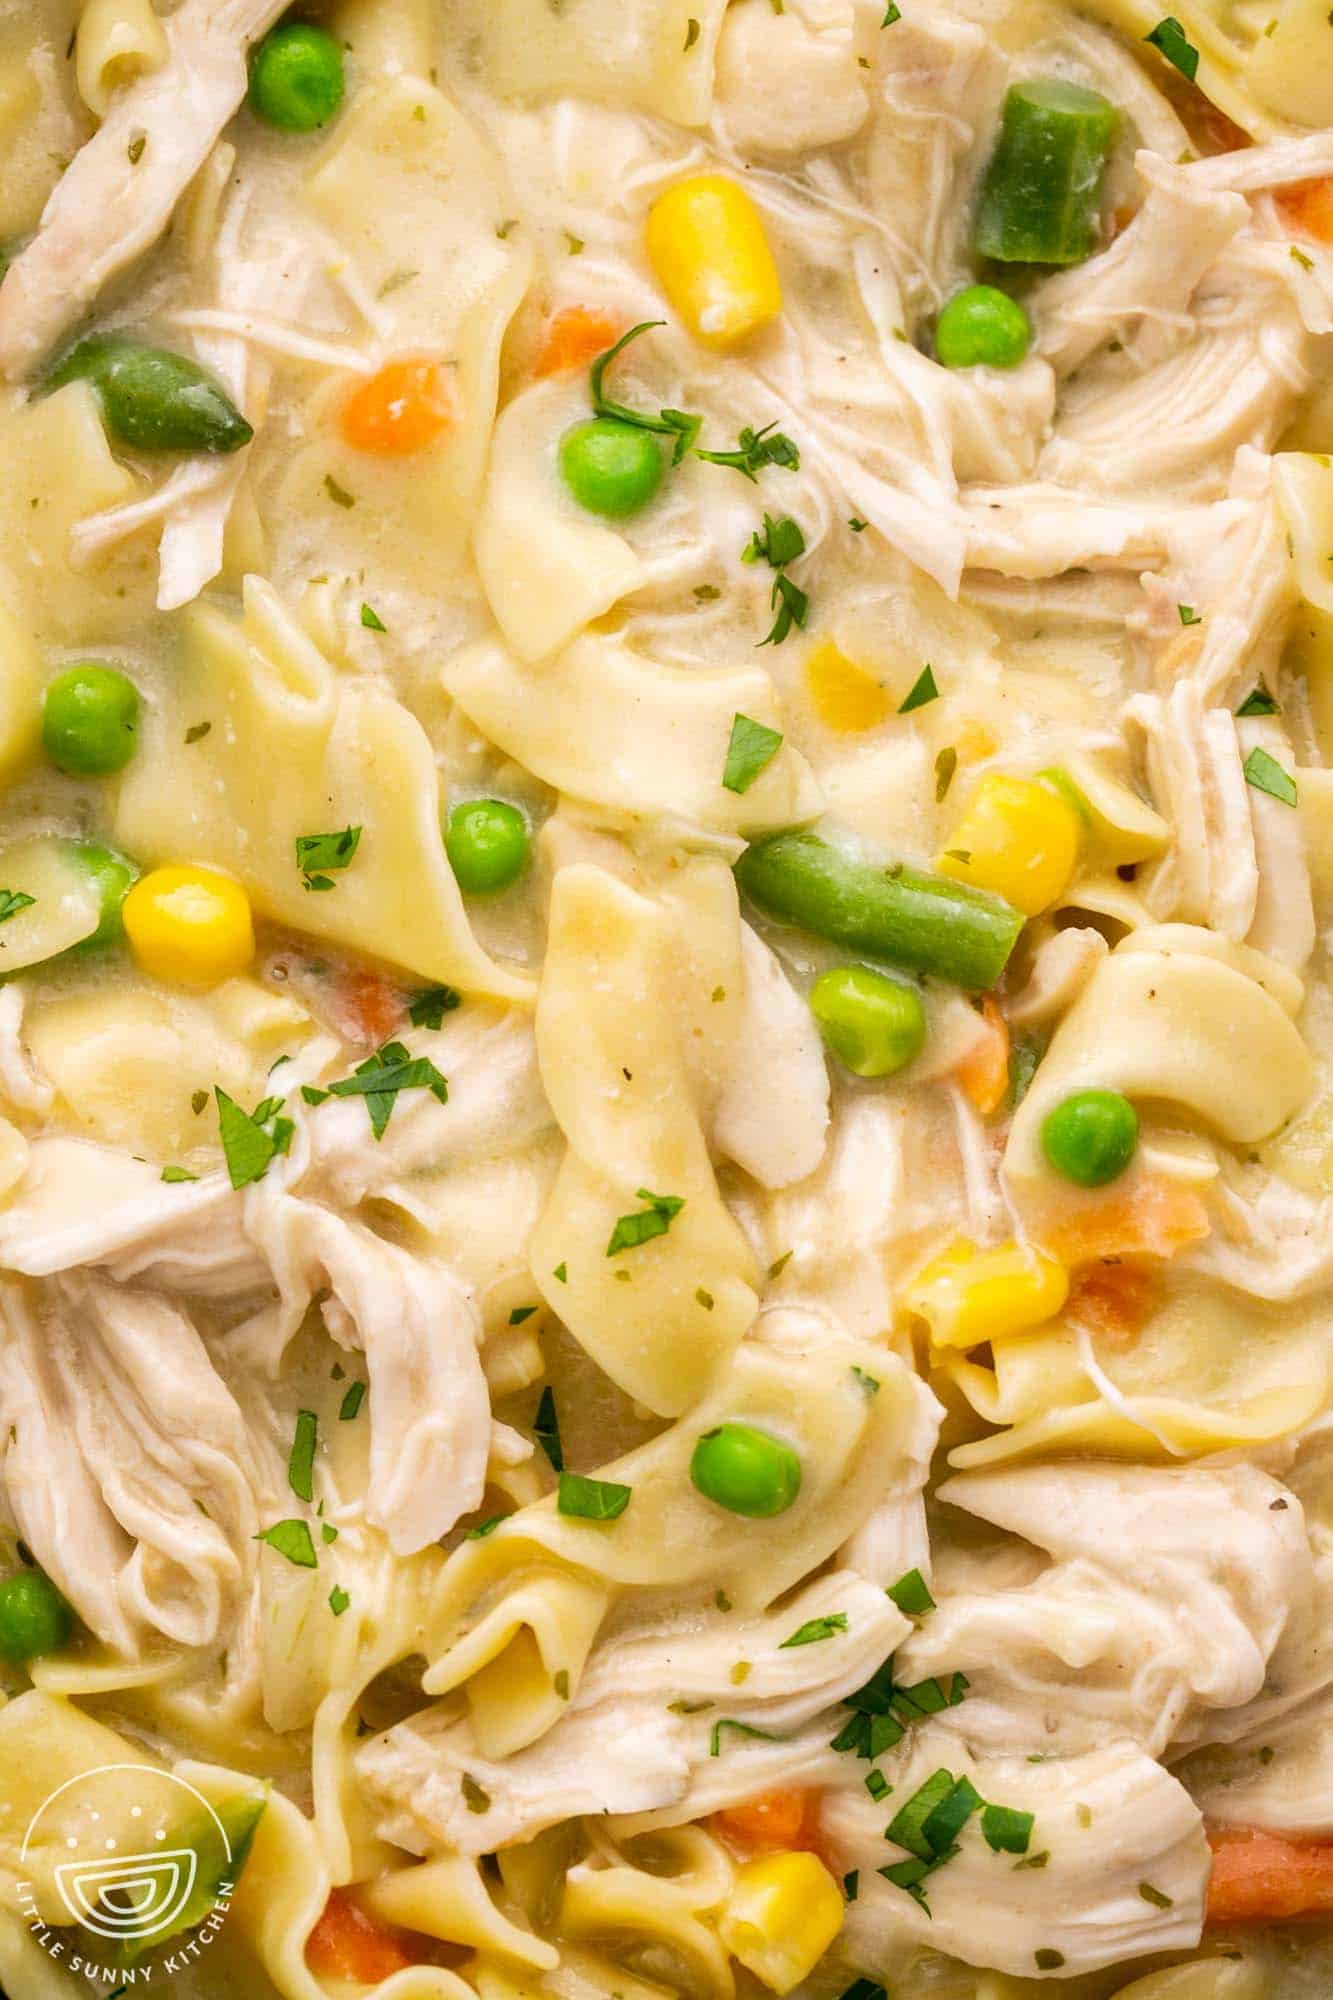 Closeup shot of egg noodles with shredded chicken, mixed veggies, in a creamy sauce, garnished with parsley.